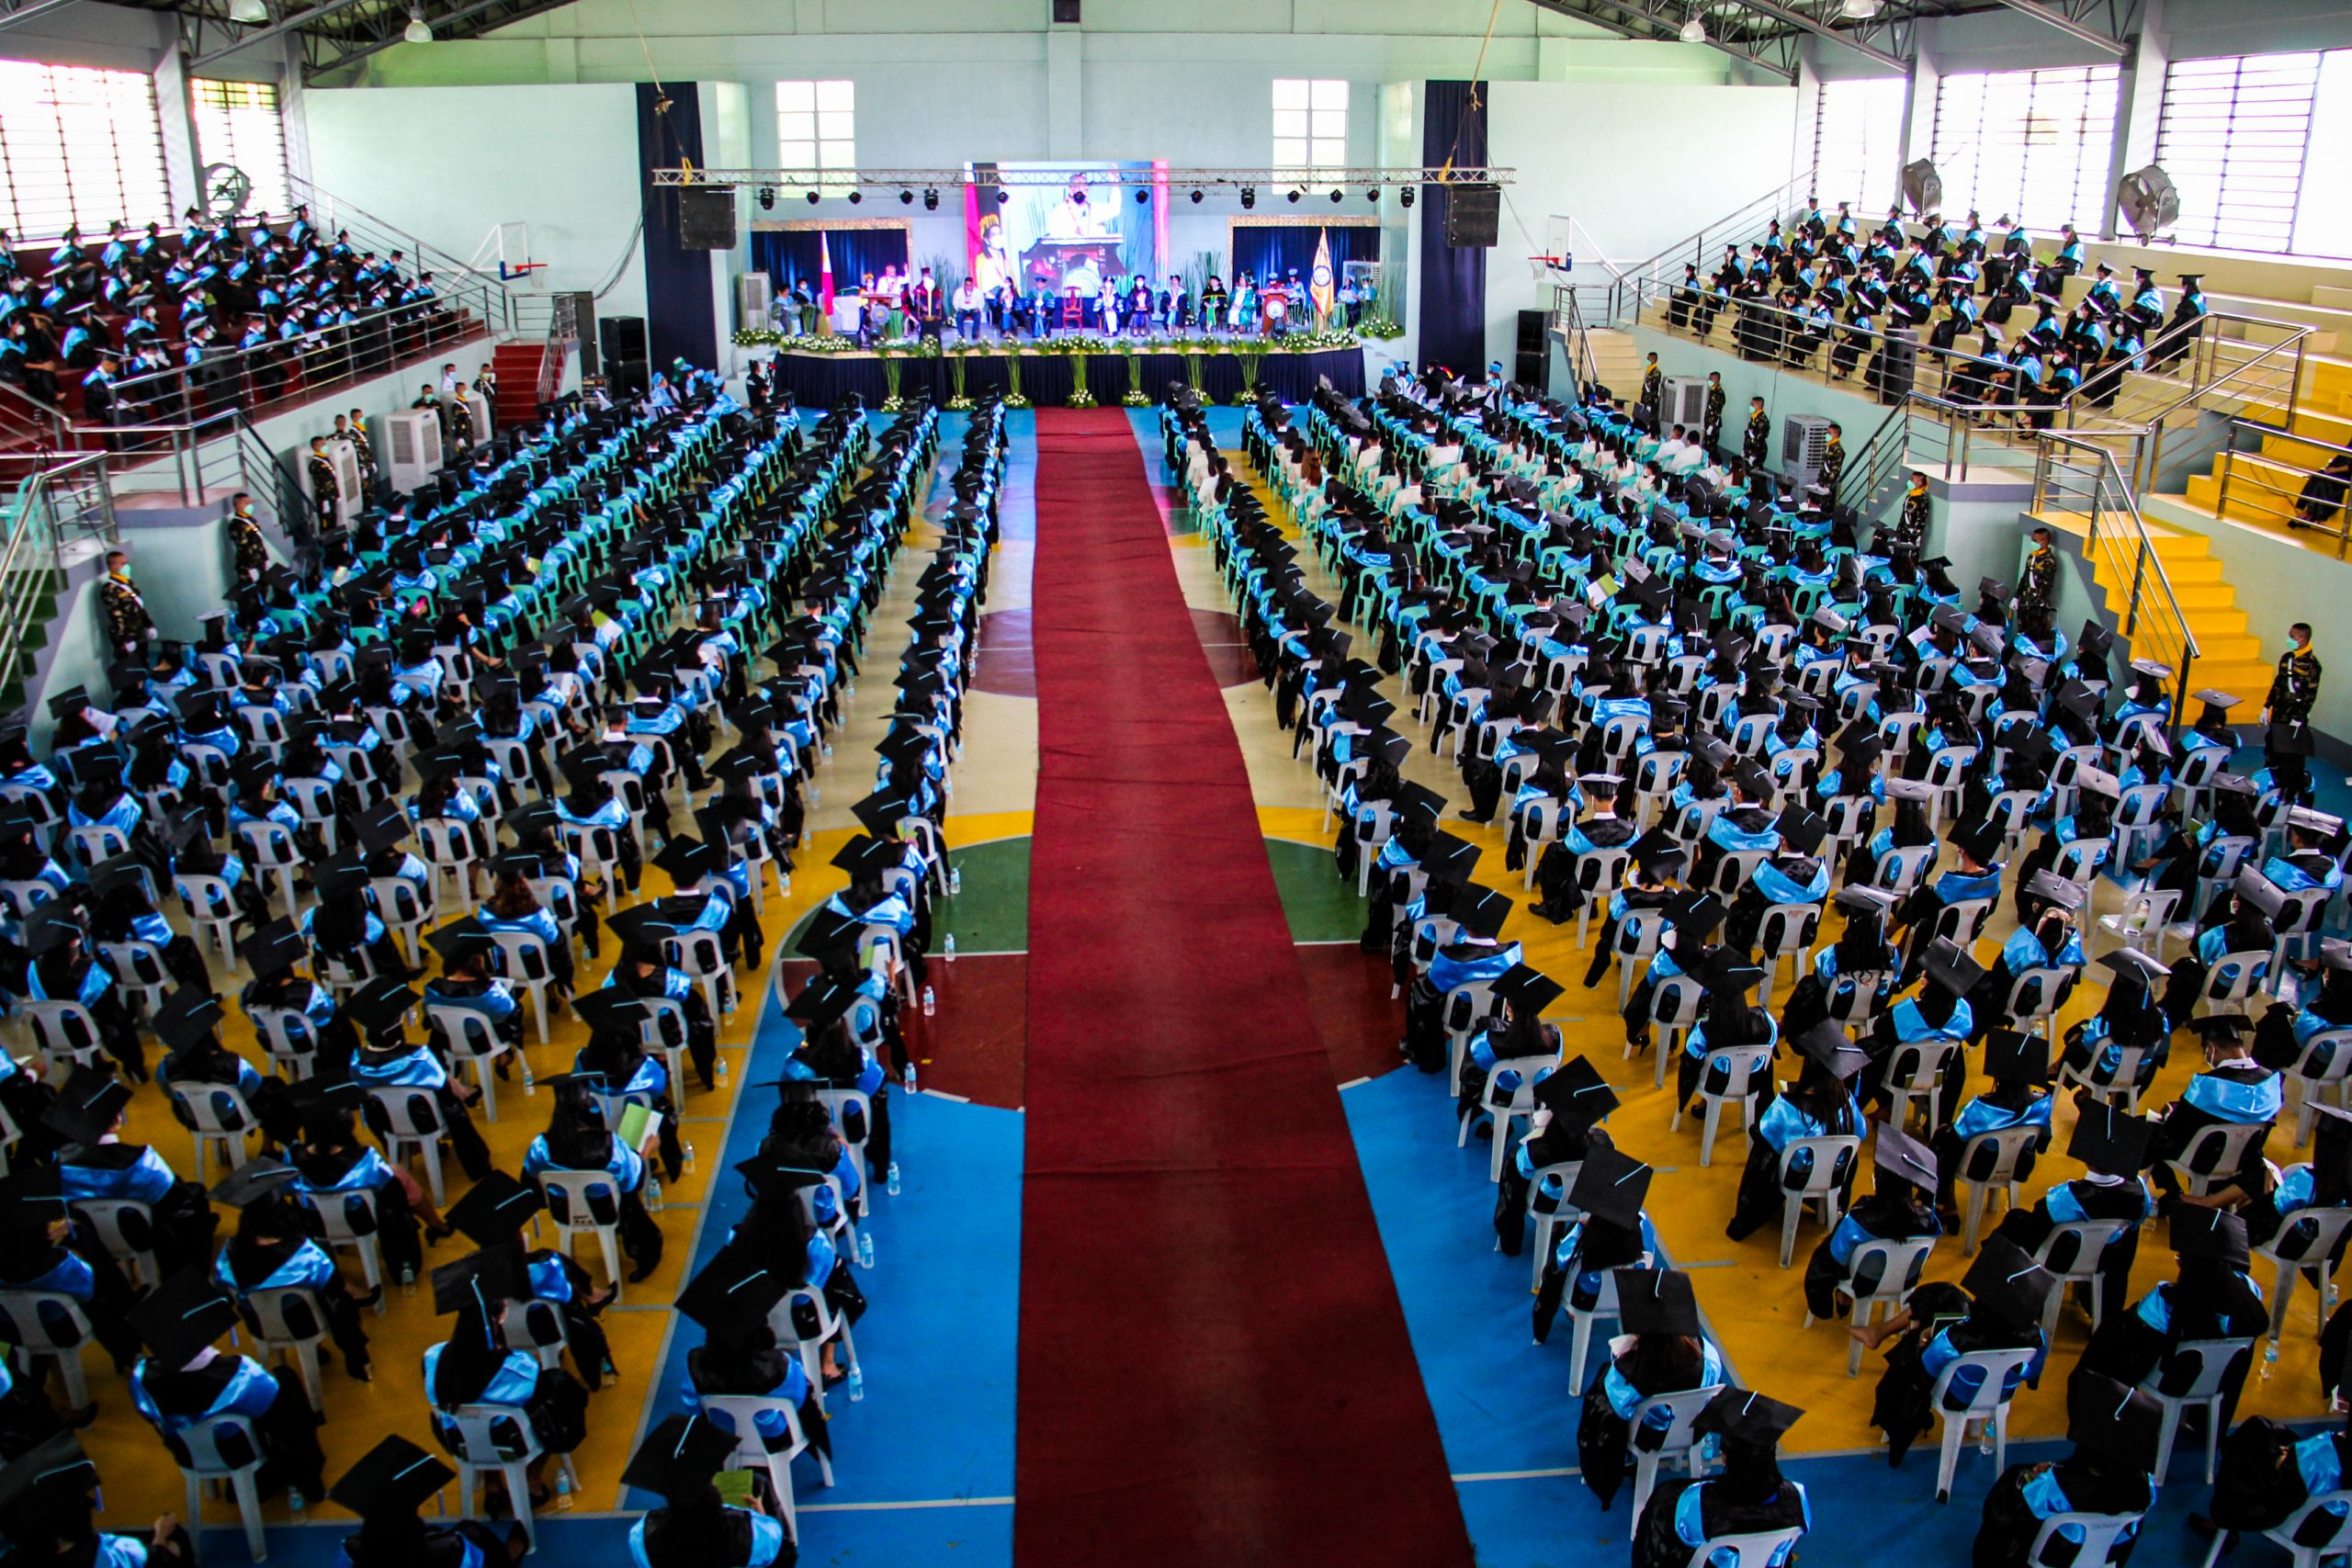 SSCT CITY CAMPUS HOLDS IN-PERSON 52nd COMMENCEMENT EXERCISES